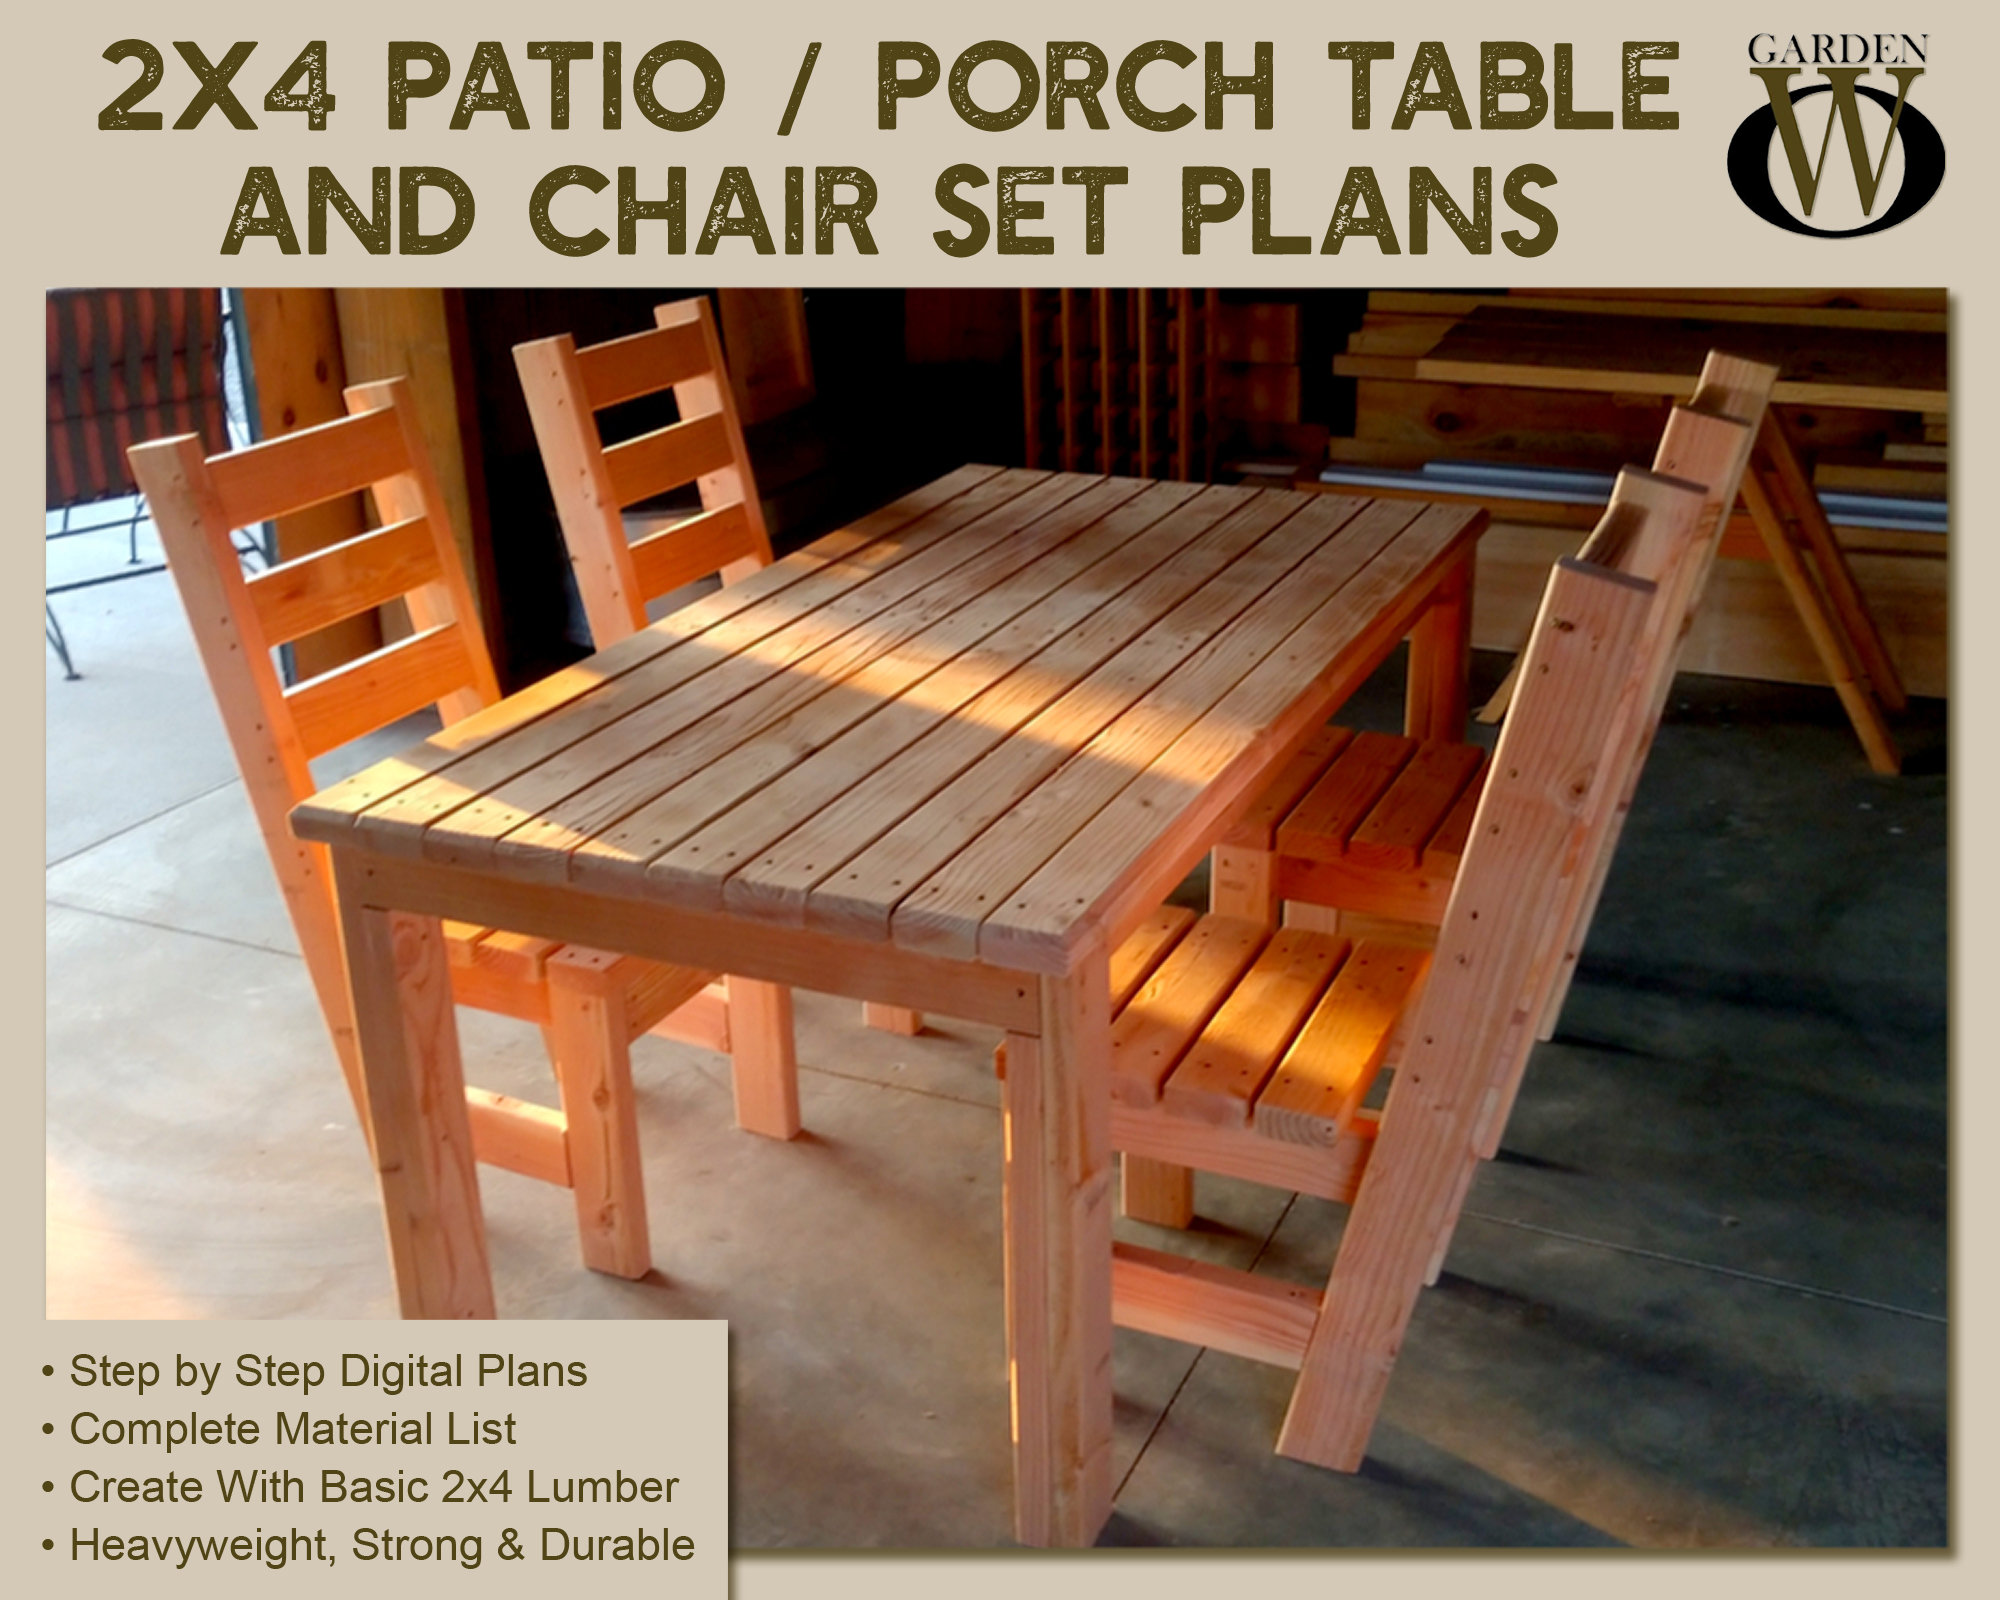 2 X 4 Patio-porch Table and Chair Set Plans Simple Easy Plans image